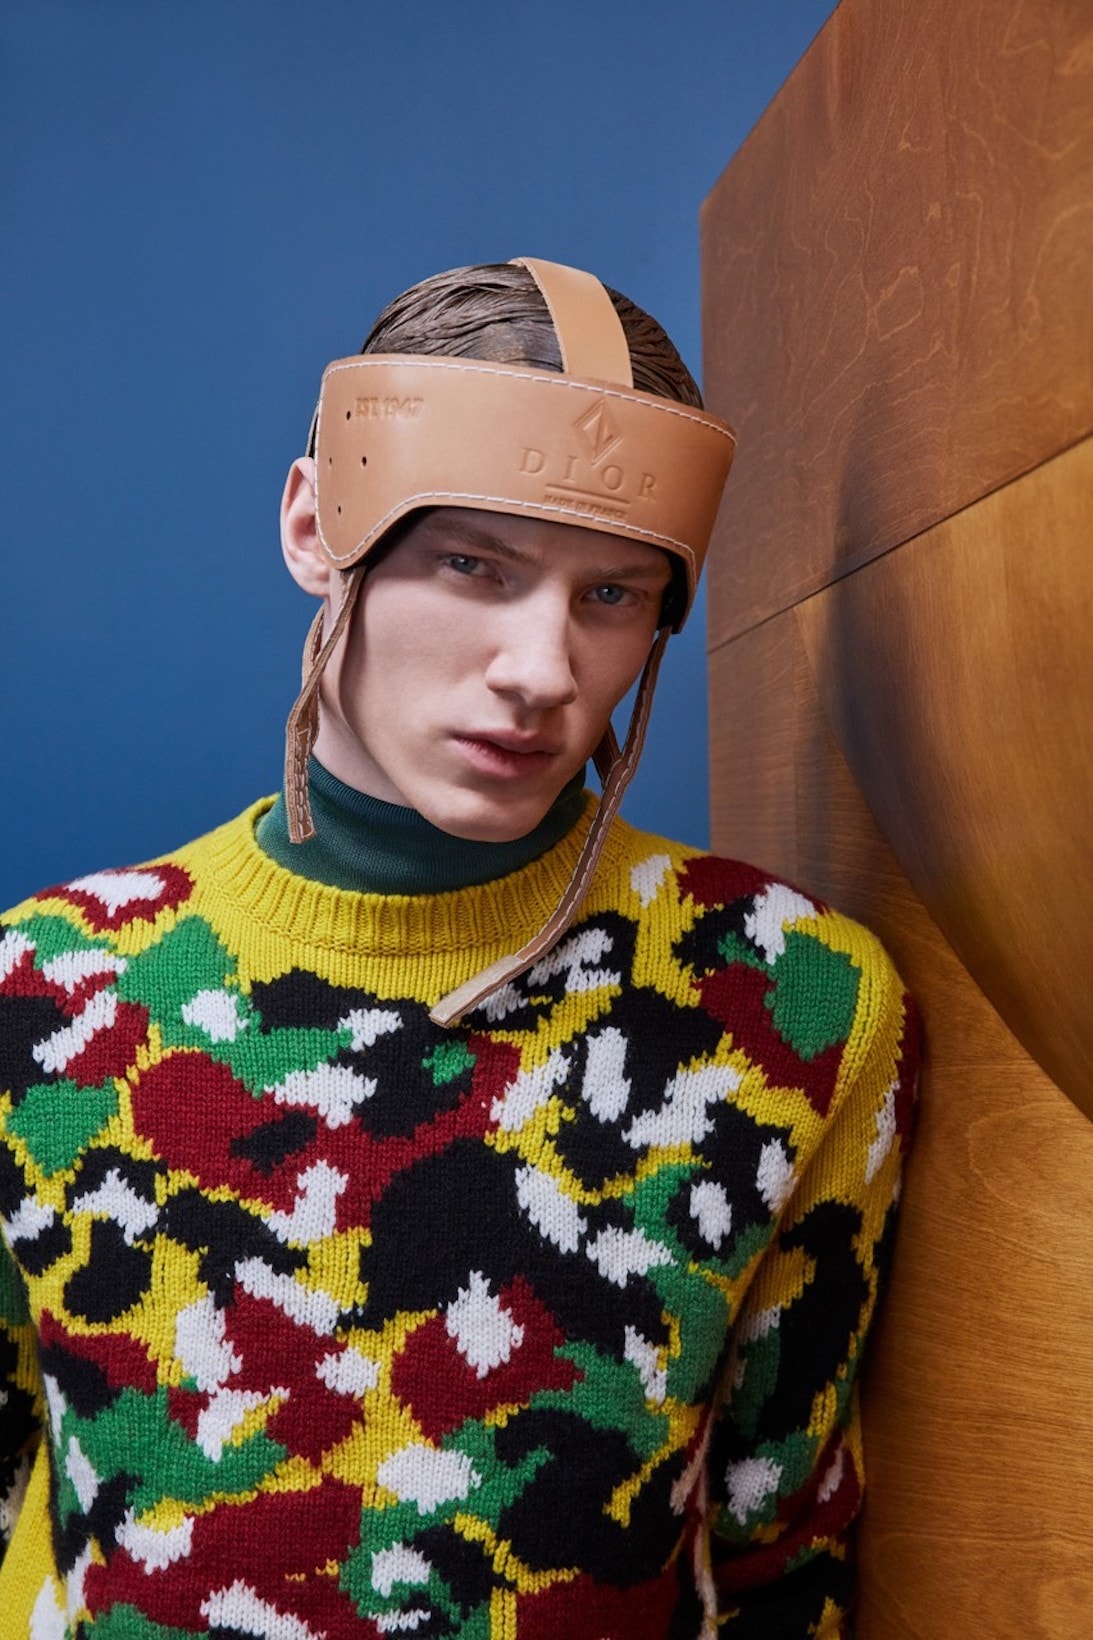 dior fall winter collection headwear head accessories sweater yellow black red